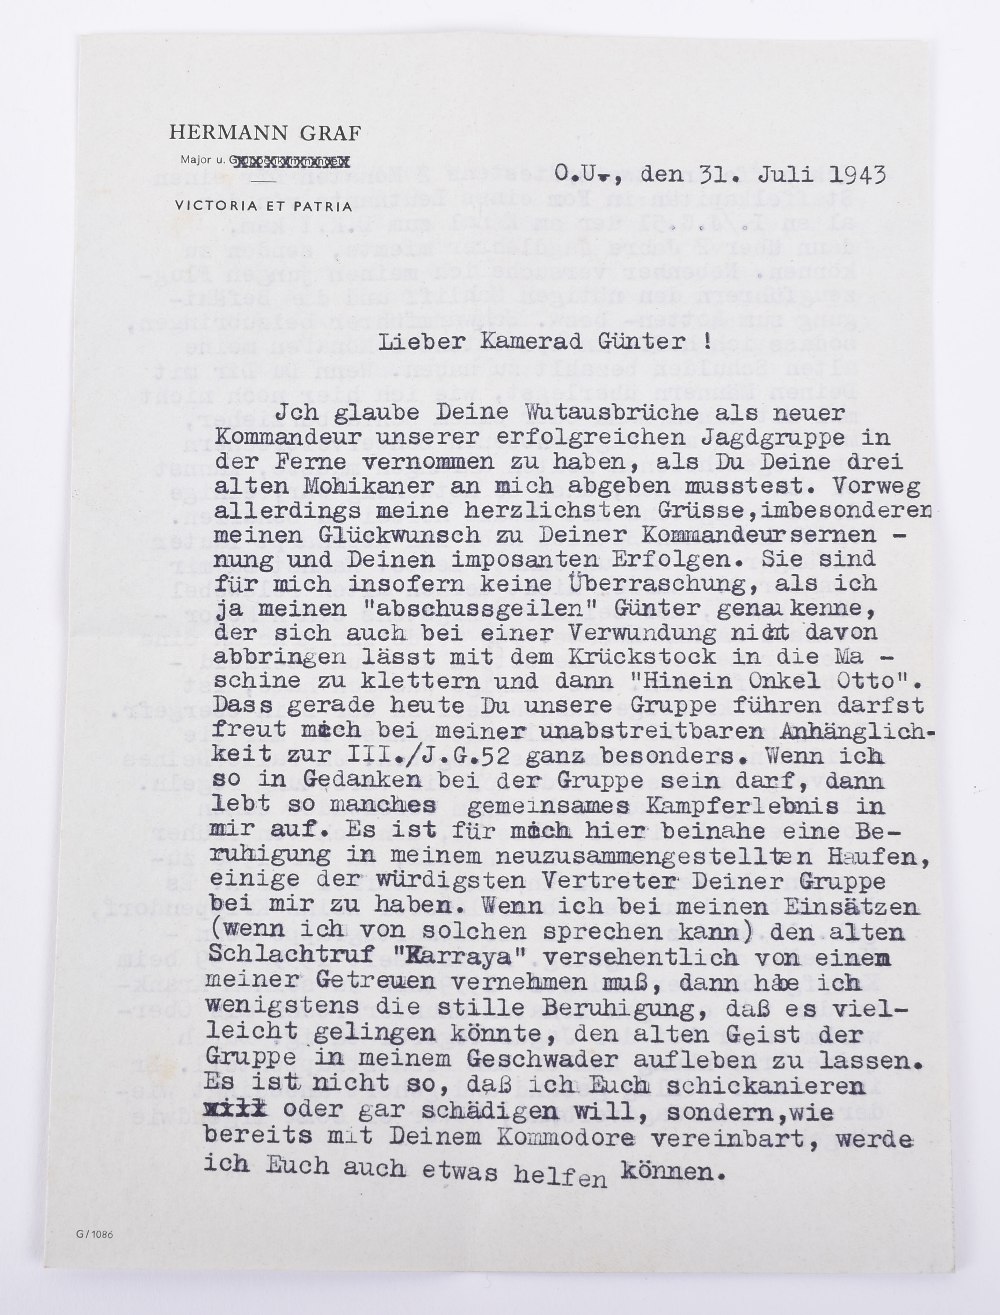 Personal Letter from Luftwaffe Fighter Ace Hermann Graf to Gunther Rall - Image 6 of 6